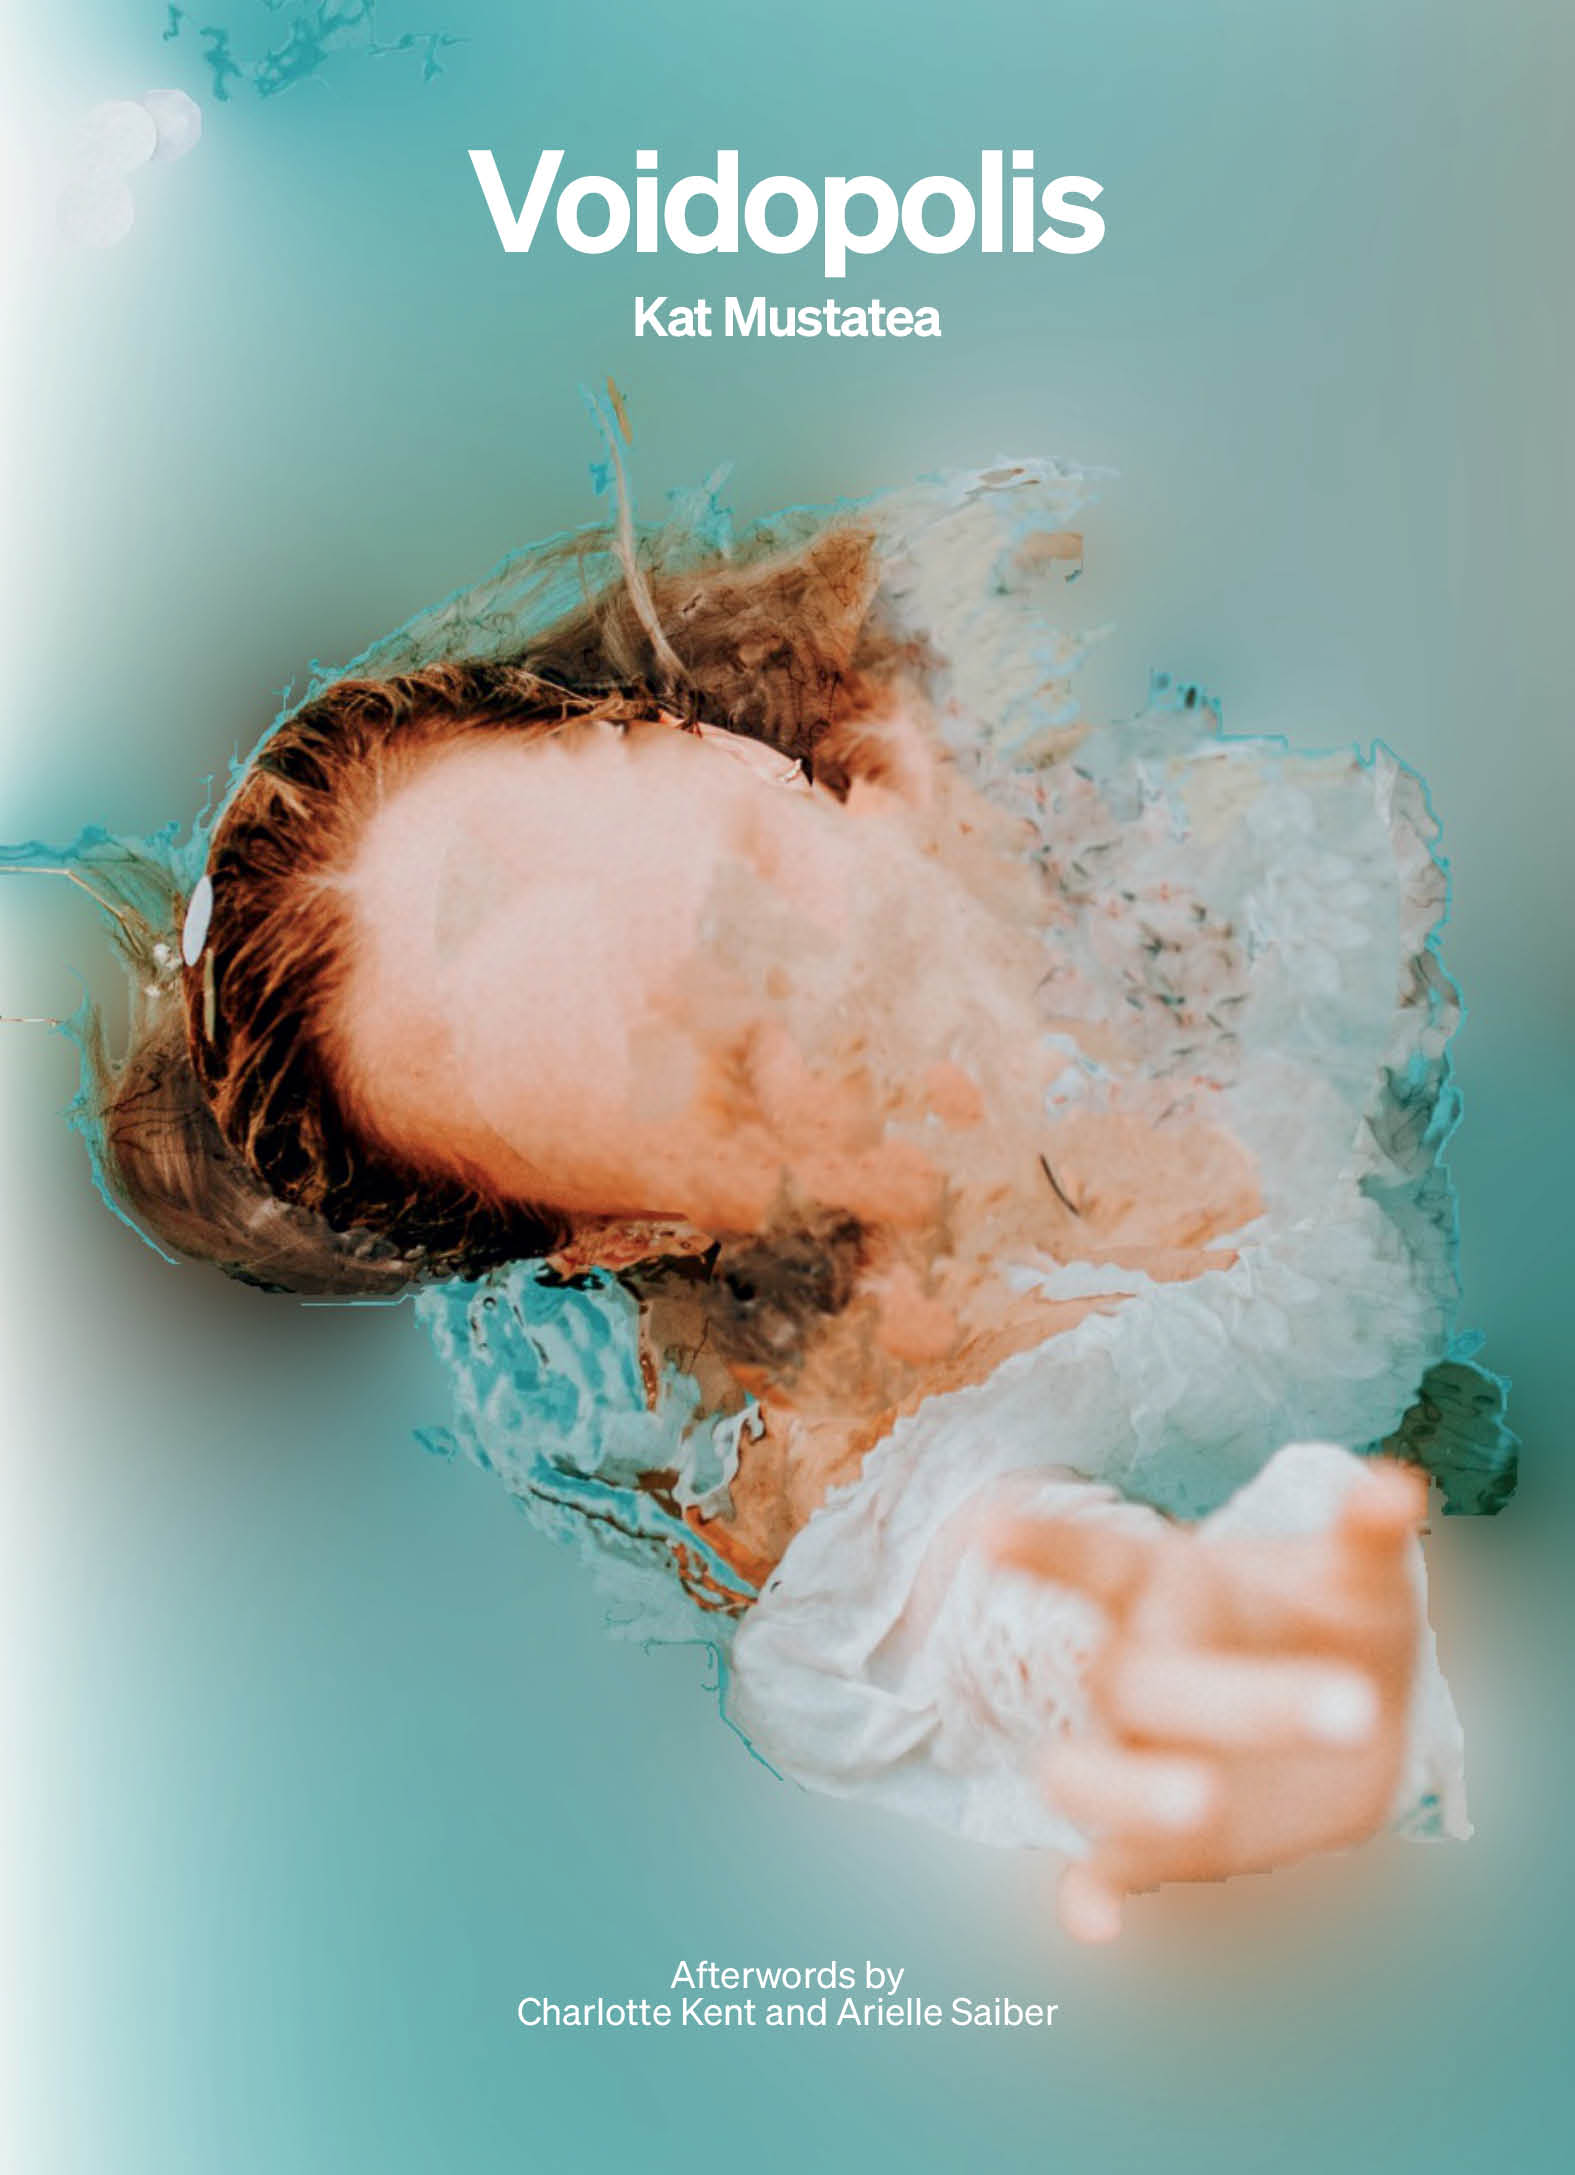 The book cover of Voidopolis by Kat Mustatea showing an image of a woman that slowly disappears